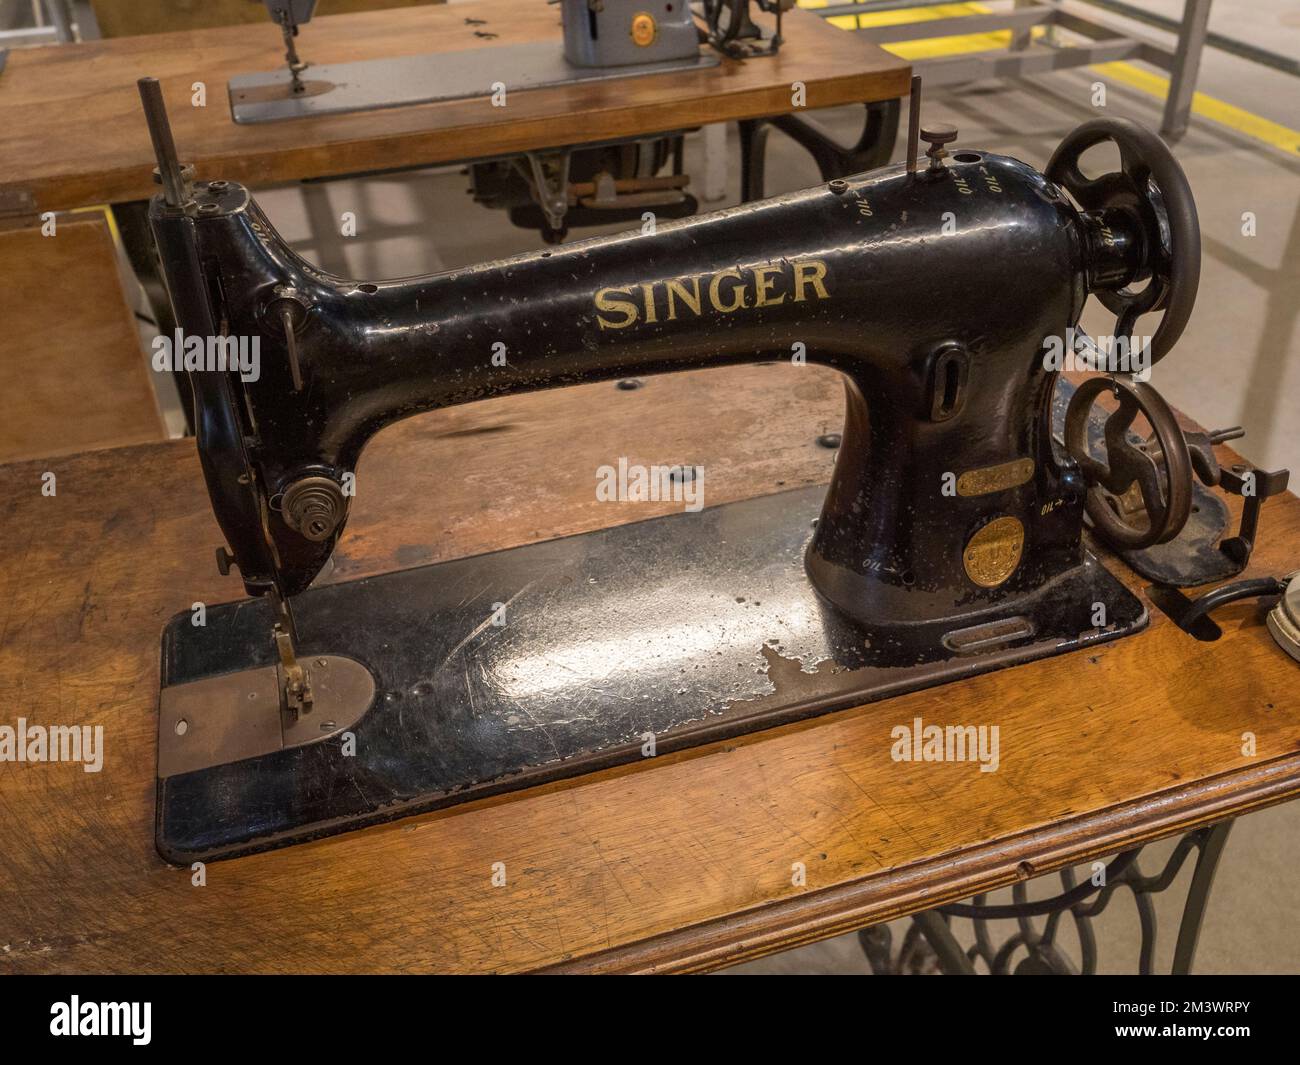 A Singer industrial sewing machine (c1920) used to make fabric-covered aircraft on display in the Bellman Hanger, Brooklands Museum, Surrey, UK Stock Photo